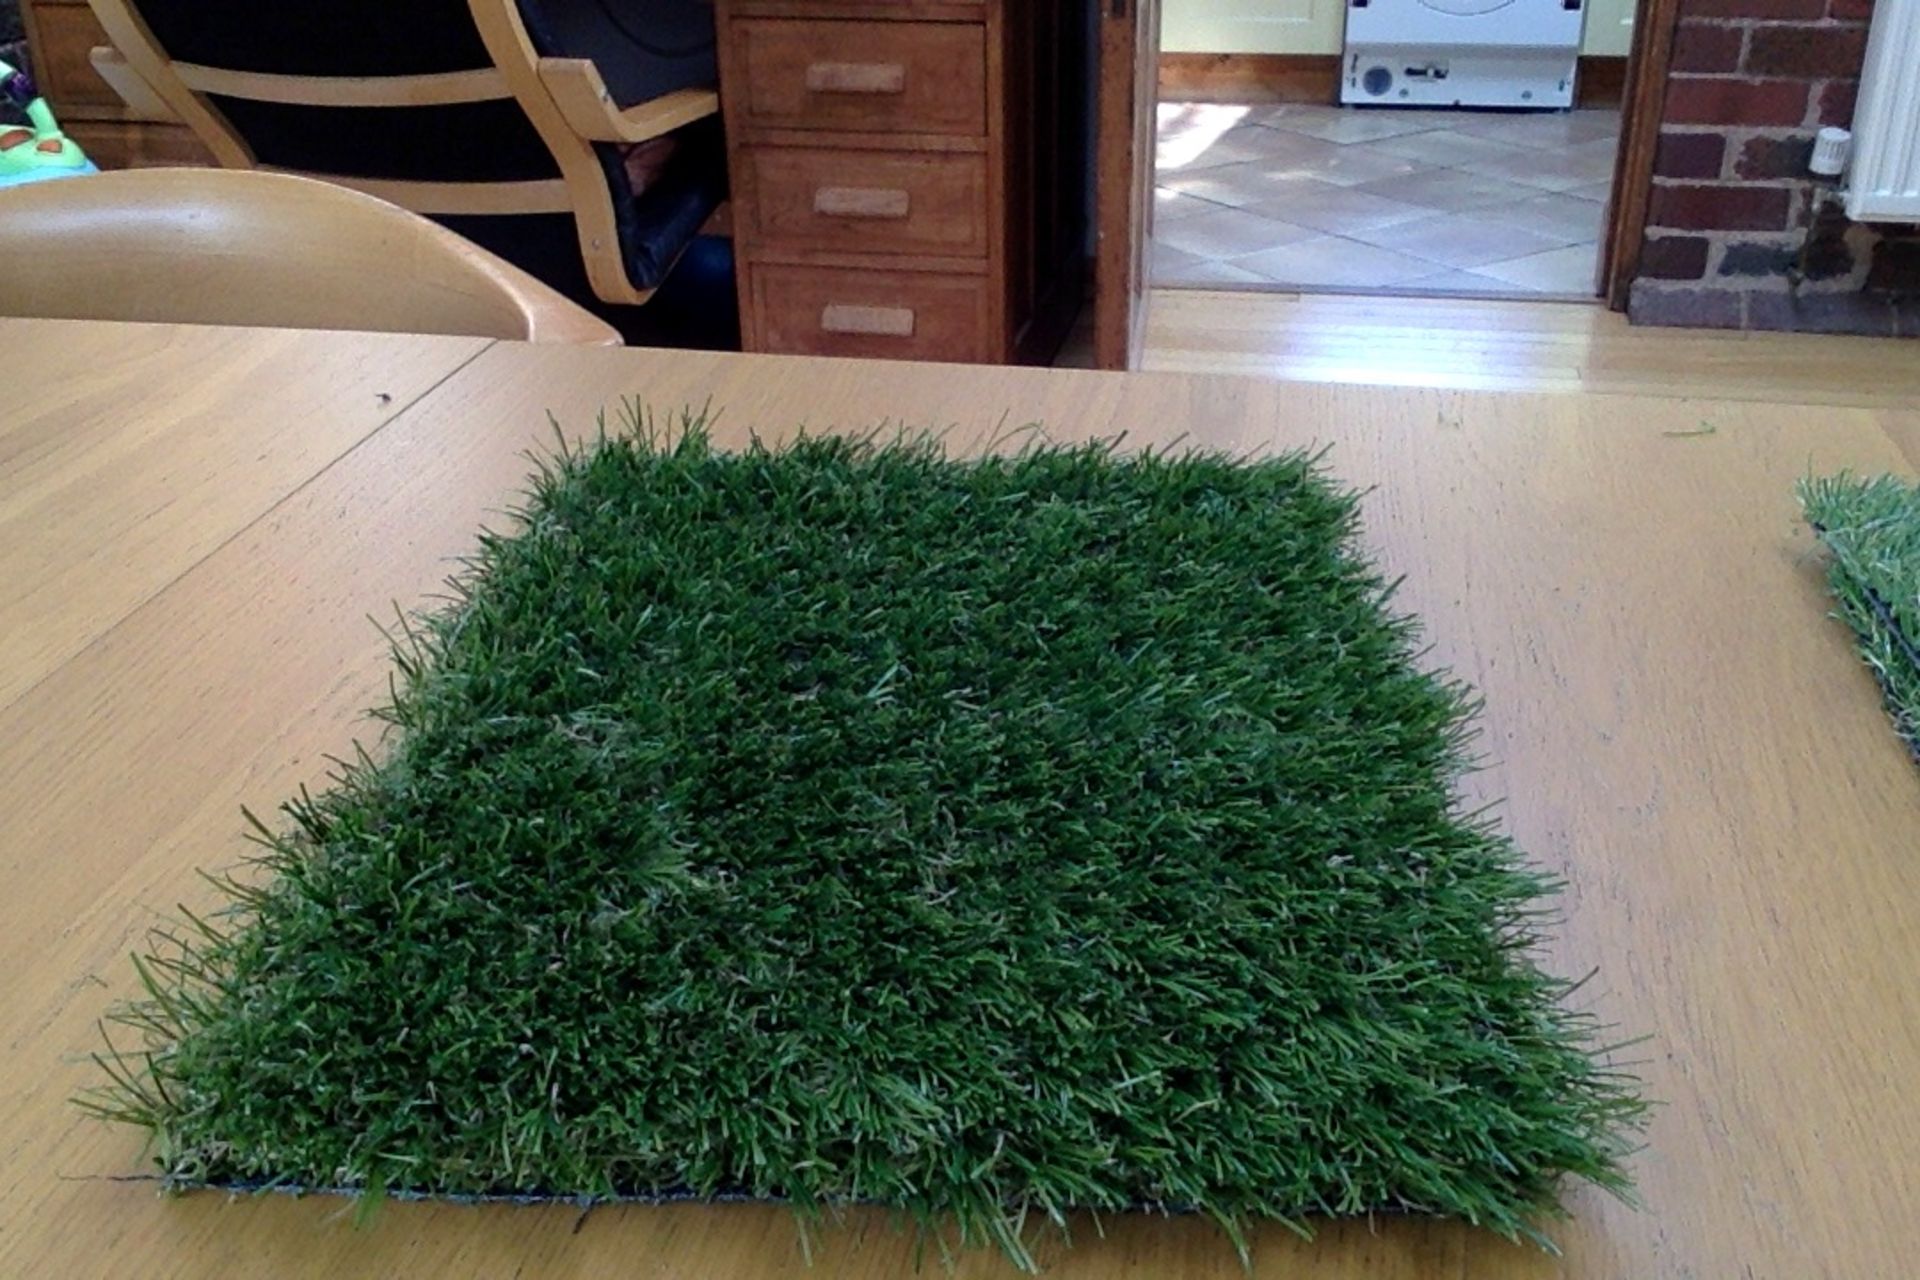 Heavy duty 40mm thick Playrite Nearly grass

25x4m roll - Total 100m2

This is the best quality,